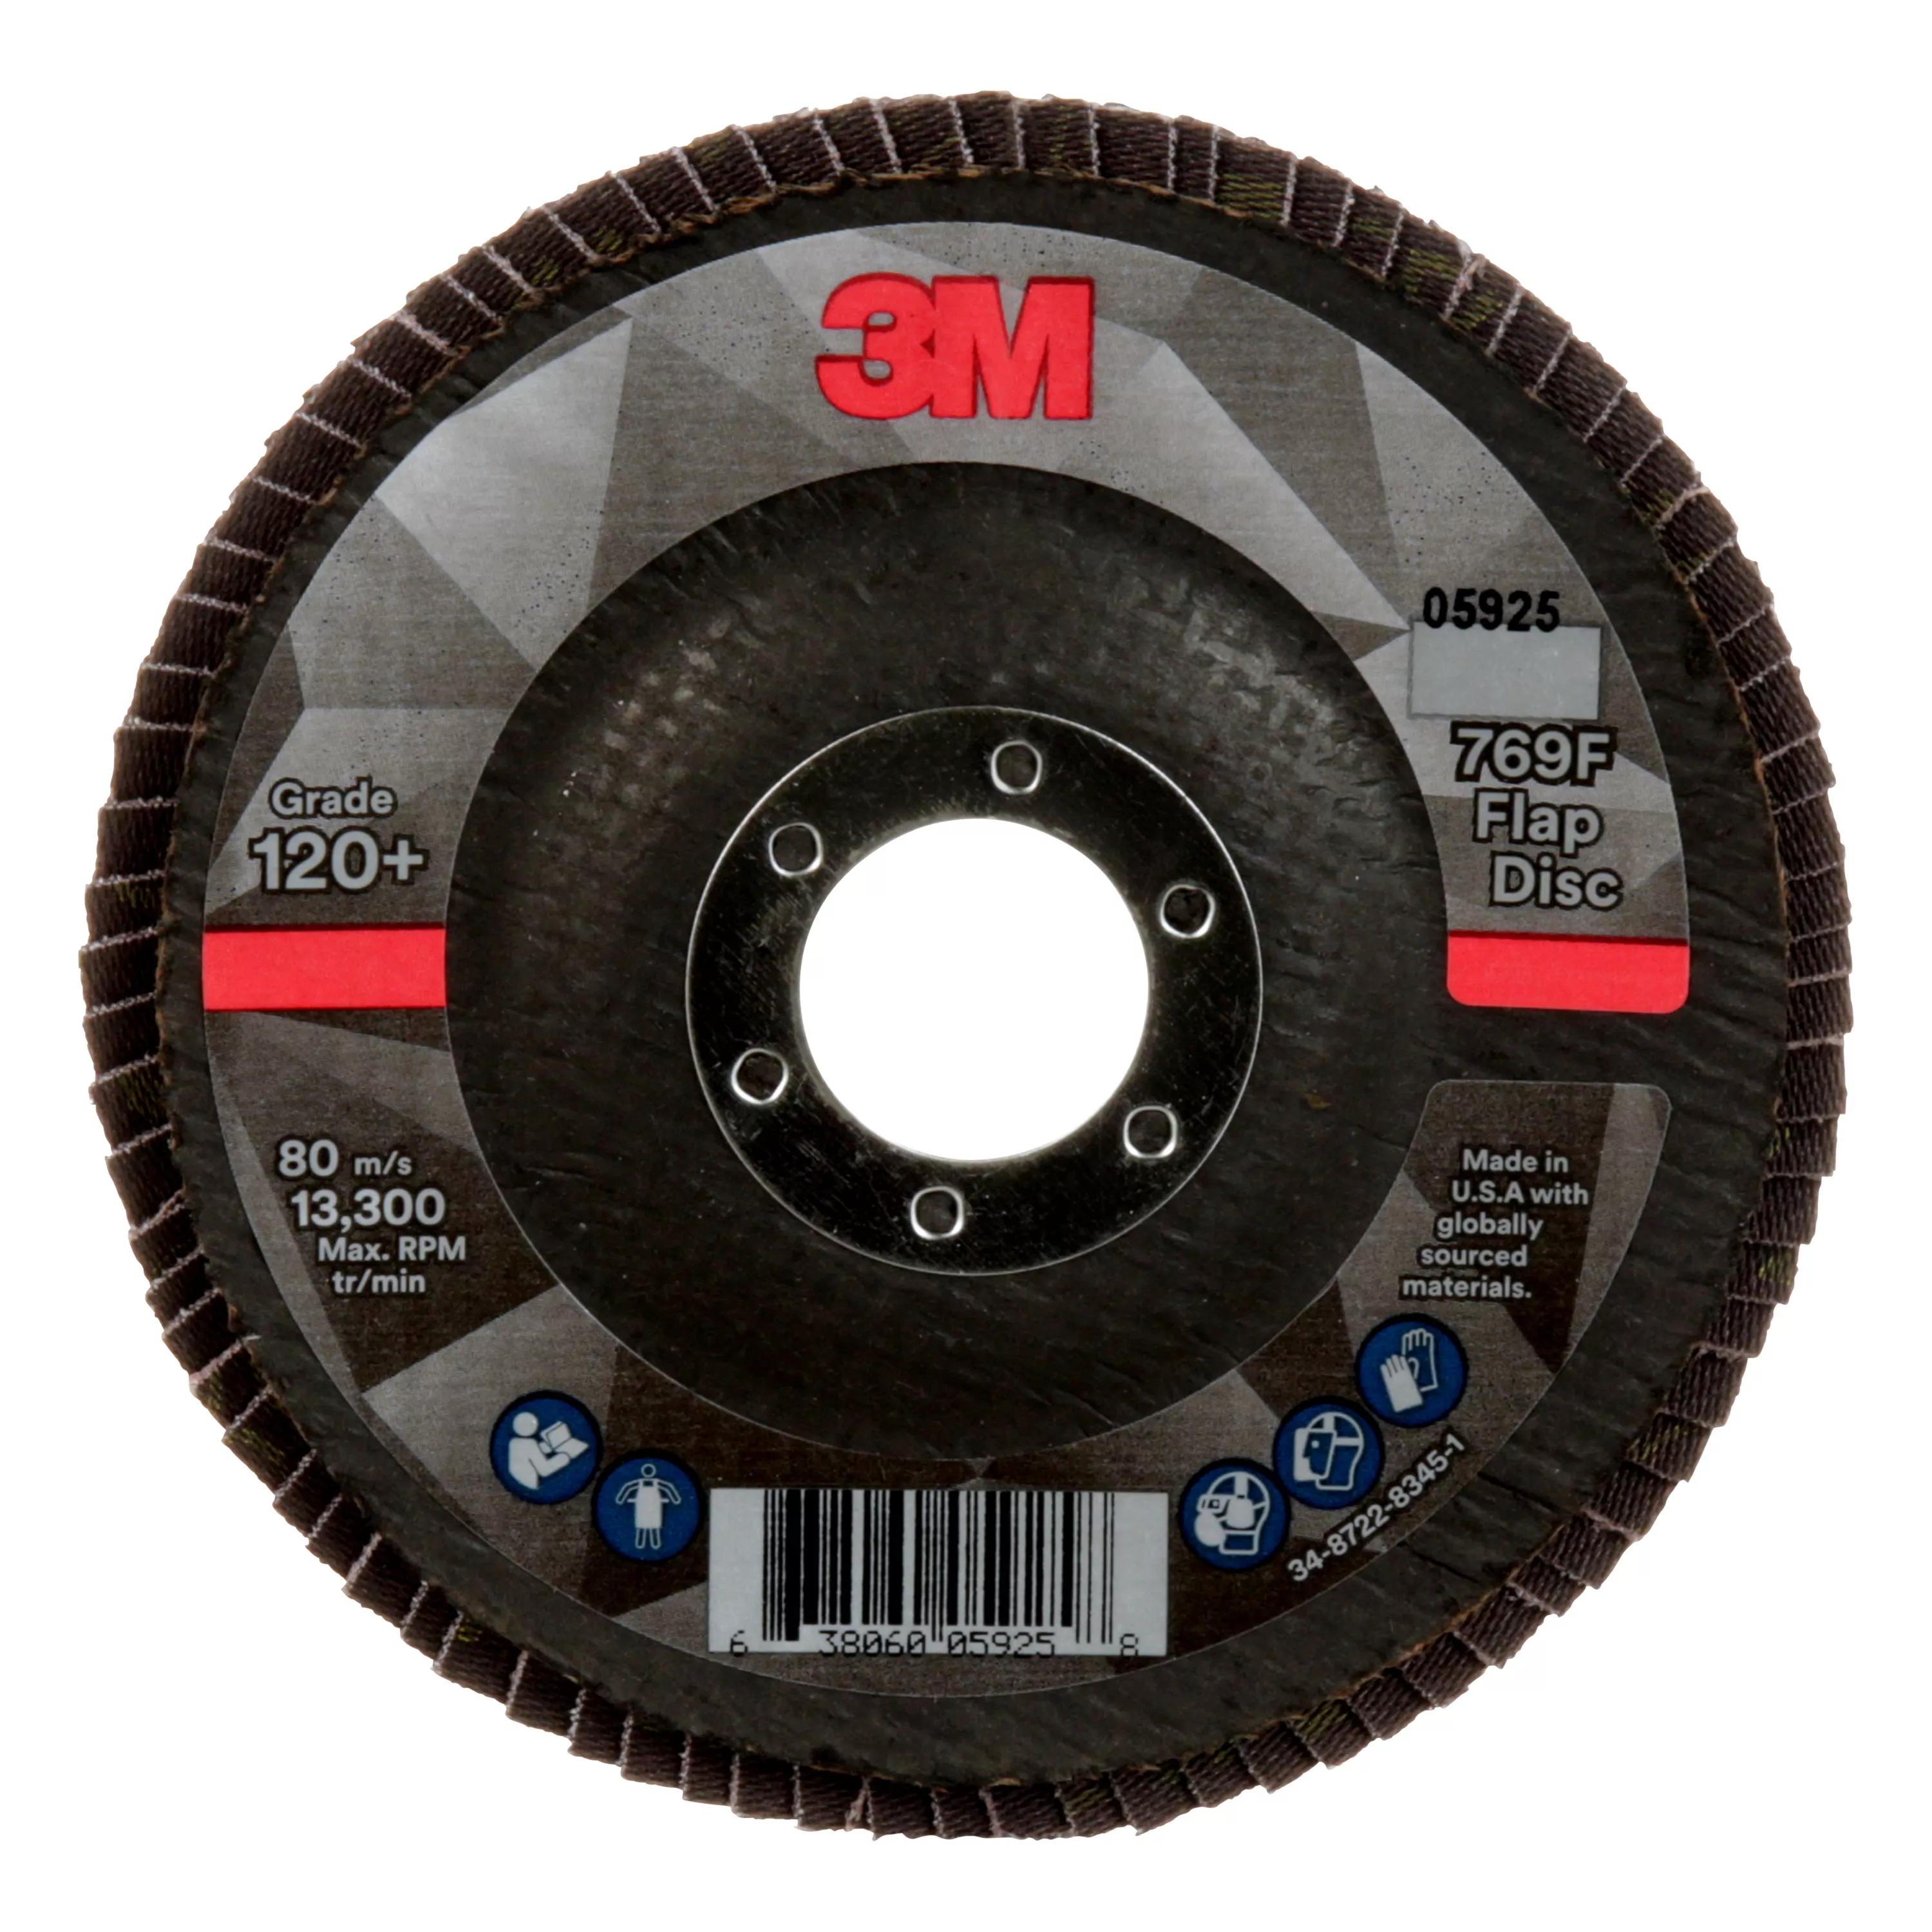 Product Number 769F | 3M™ Flap Disc 769F